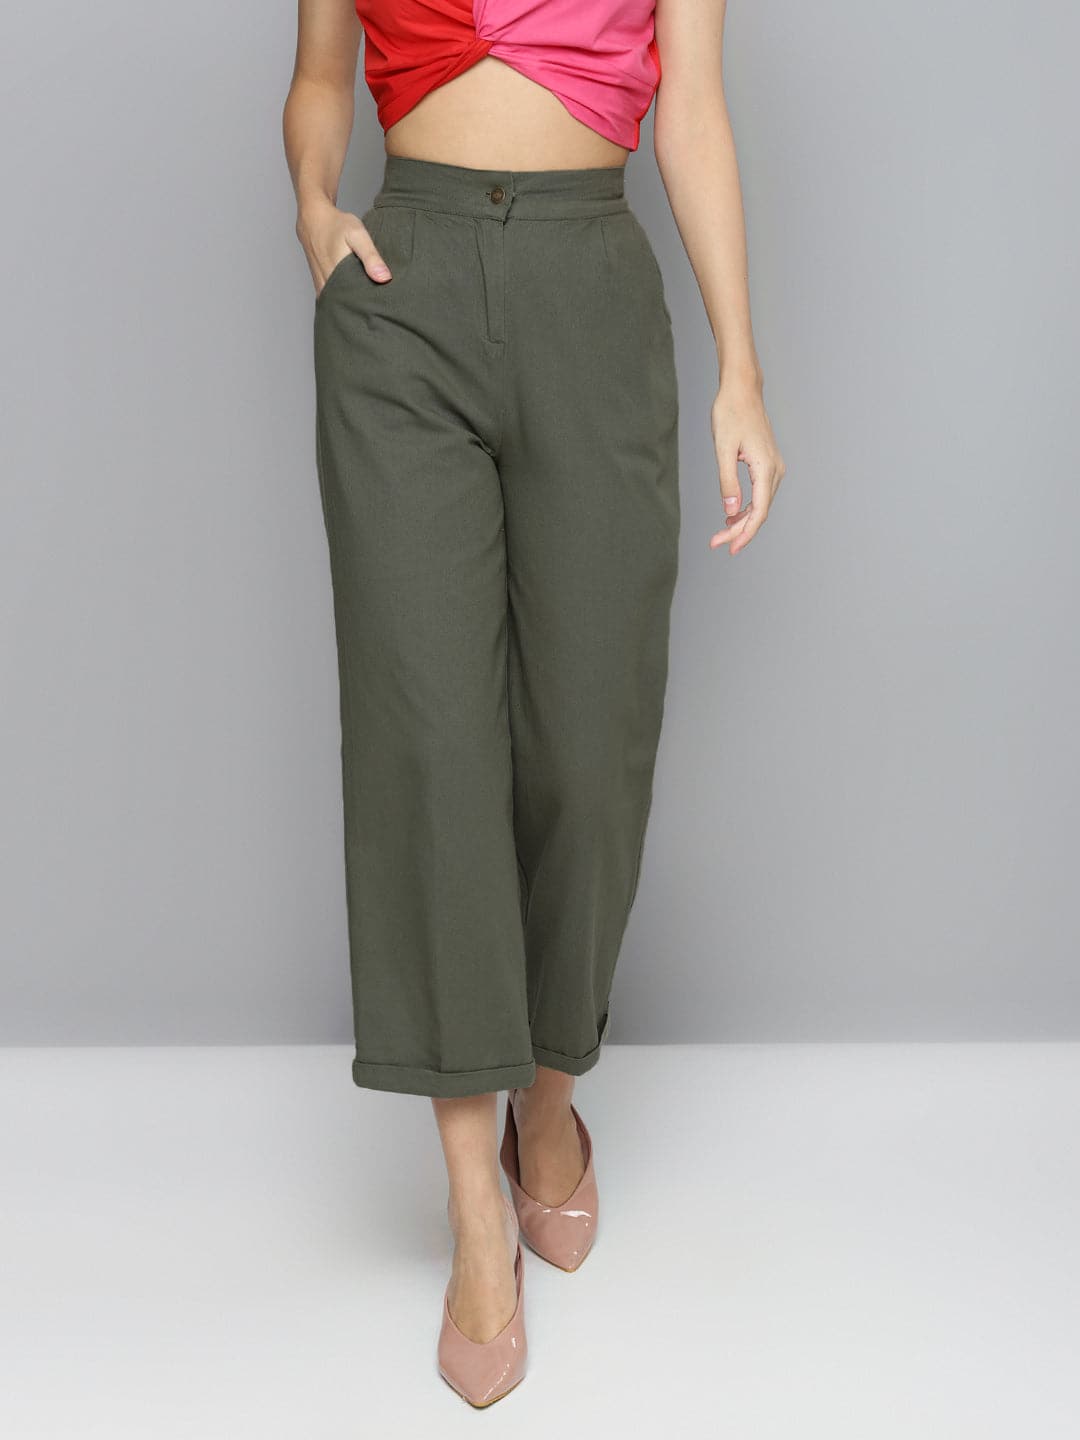 Olive Green Color Ankle Length Fusion Cotton Pant